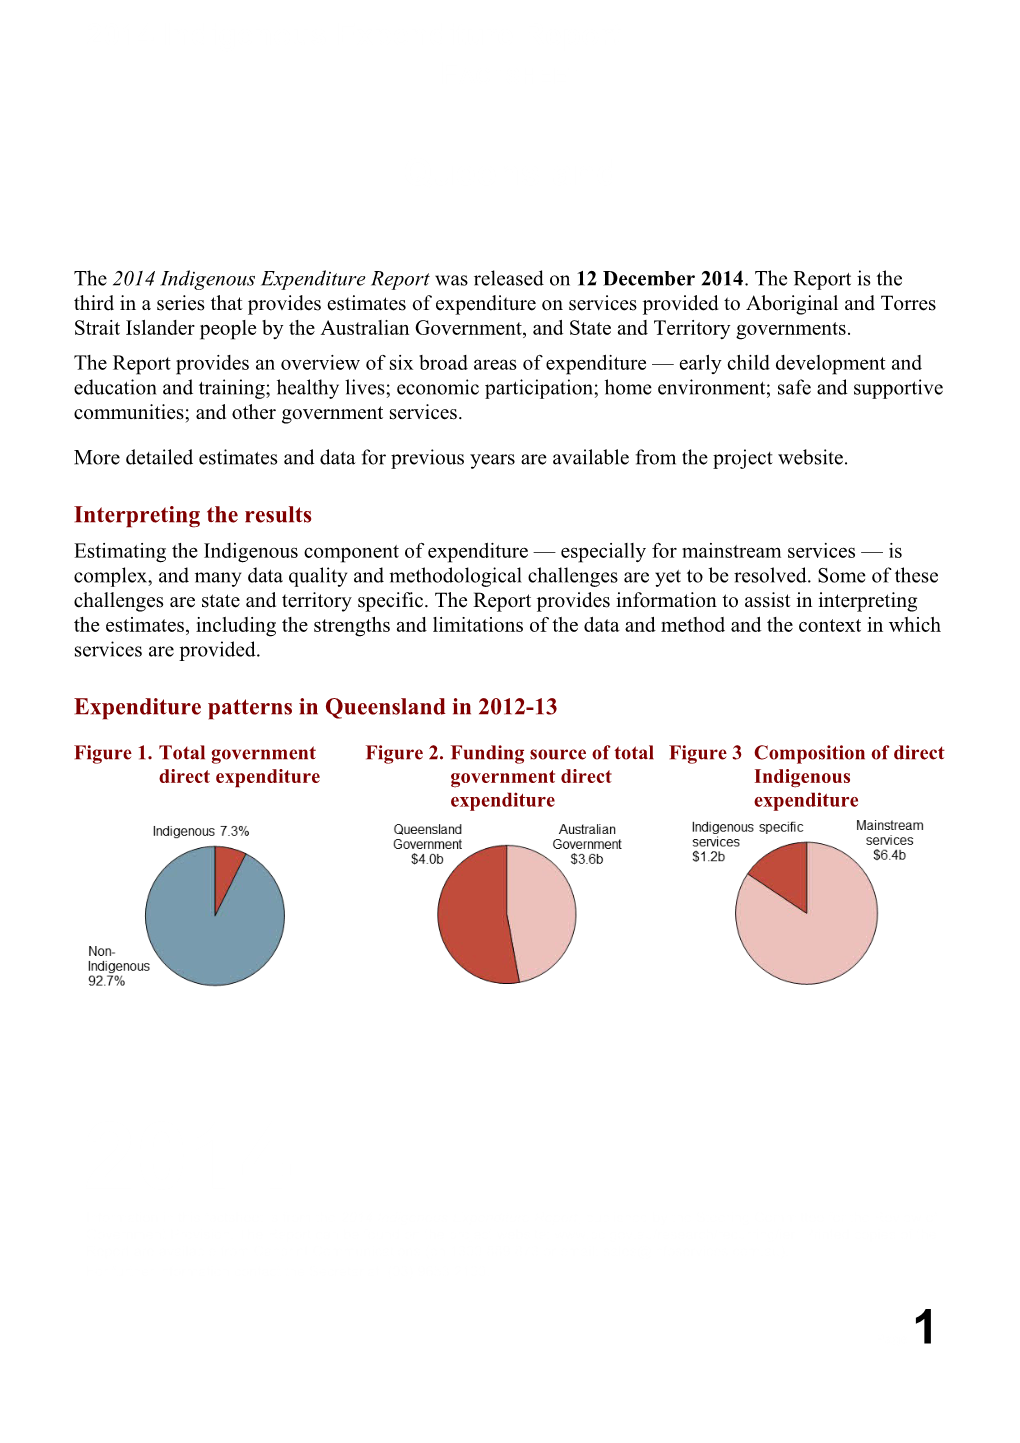 The 2014 Indigenous Expenditure Report Was Released on 12December 2014. the Report Is The